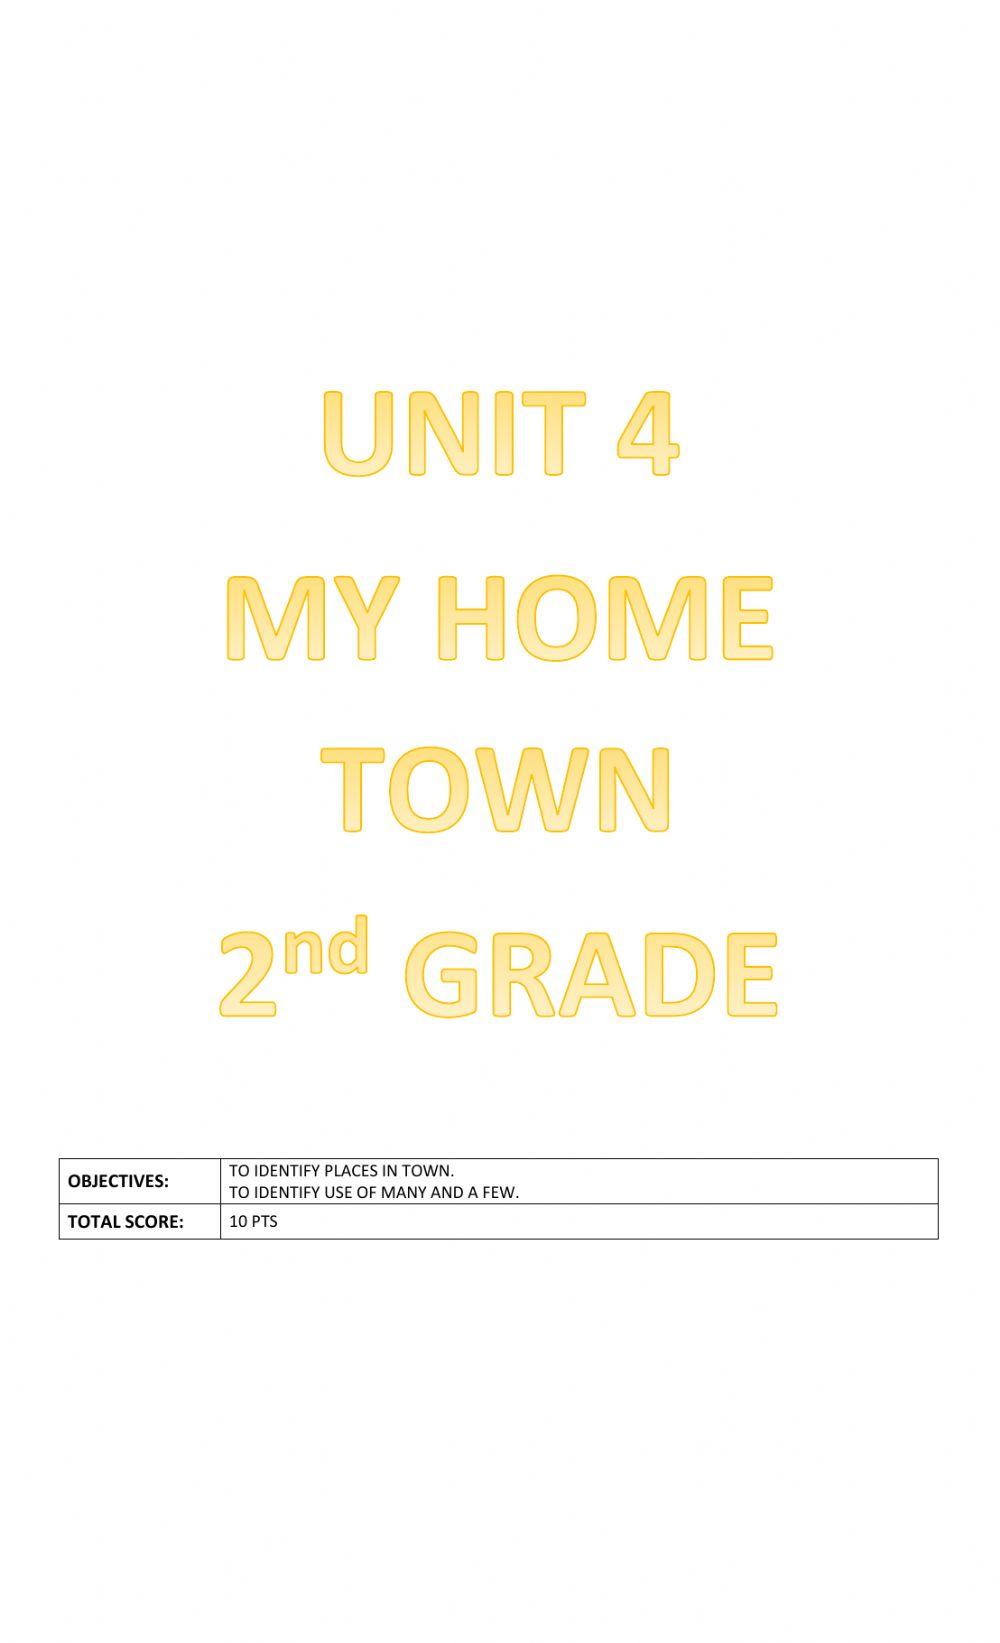 Unit 4: My home town